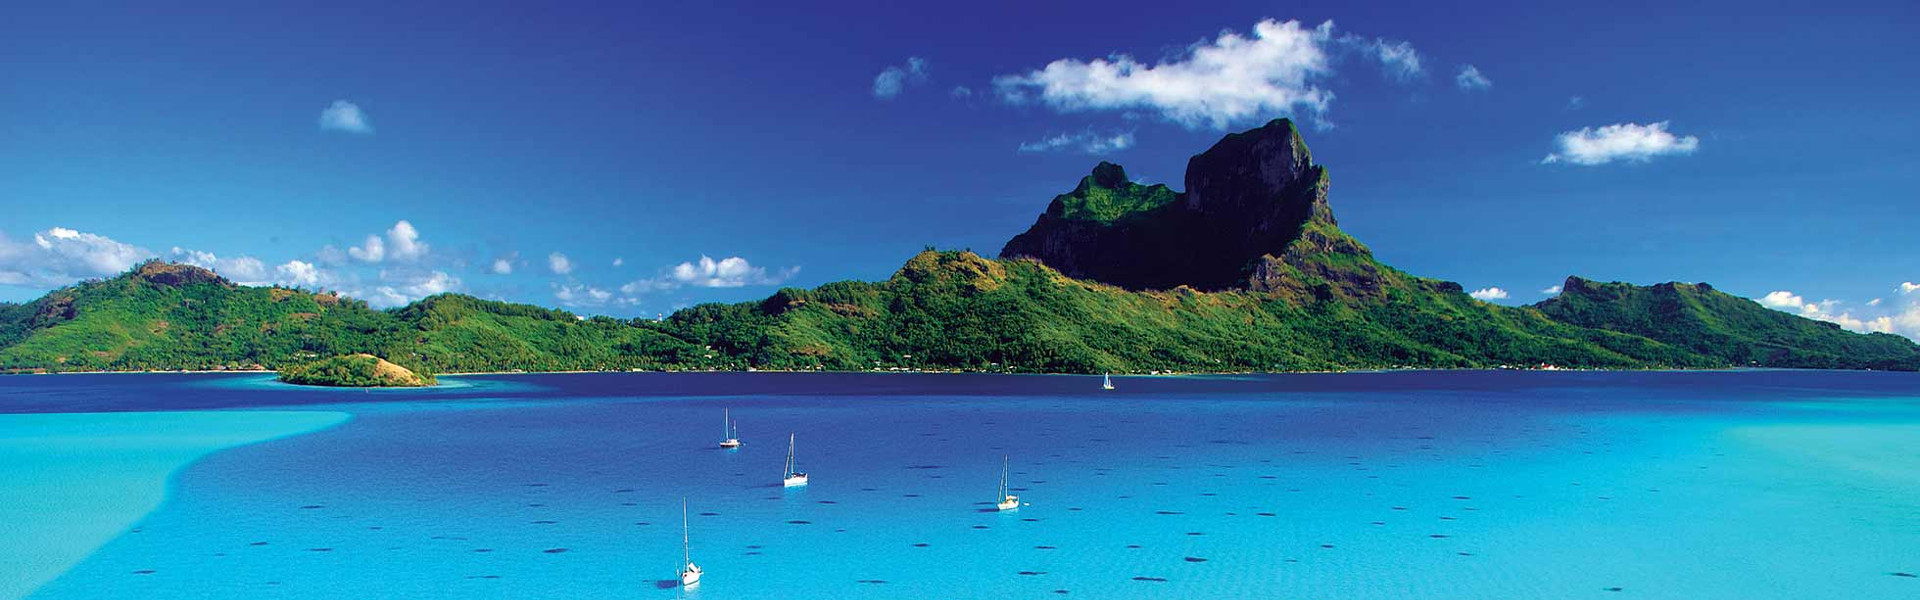 Start dreaming in Tahiti: All-inclusive heavenly landscapes 